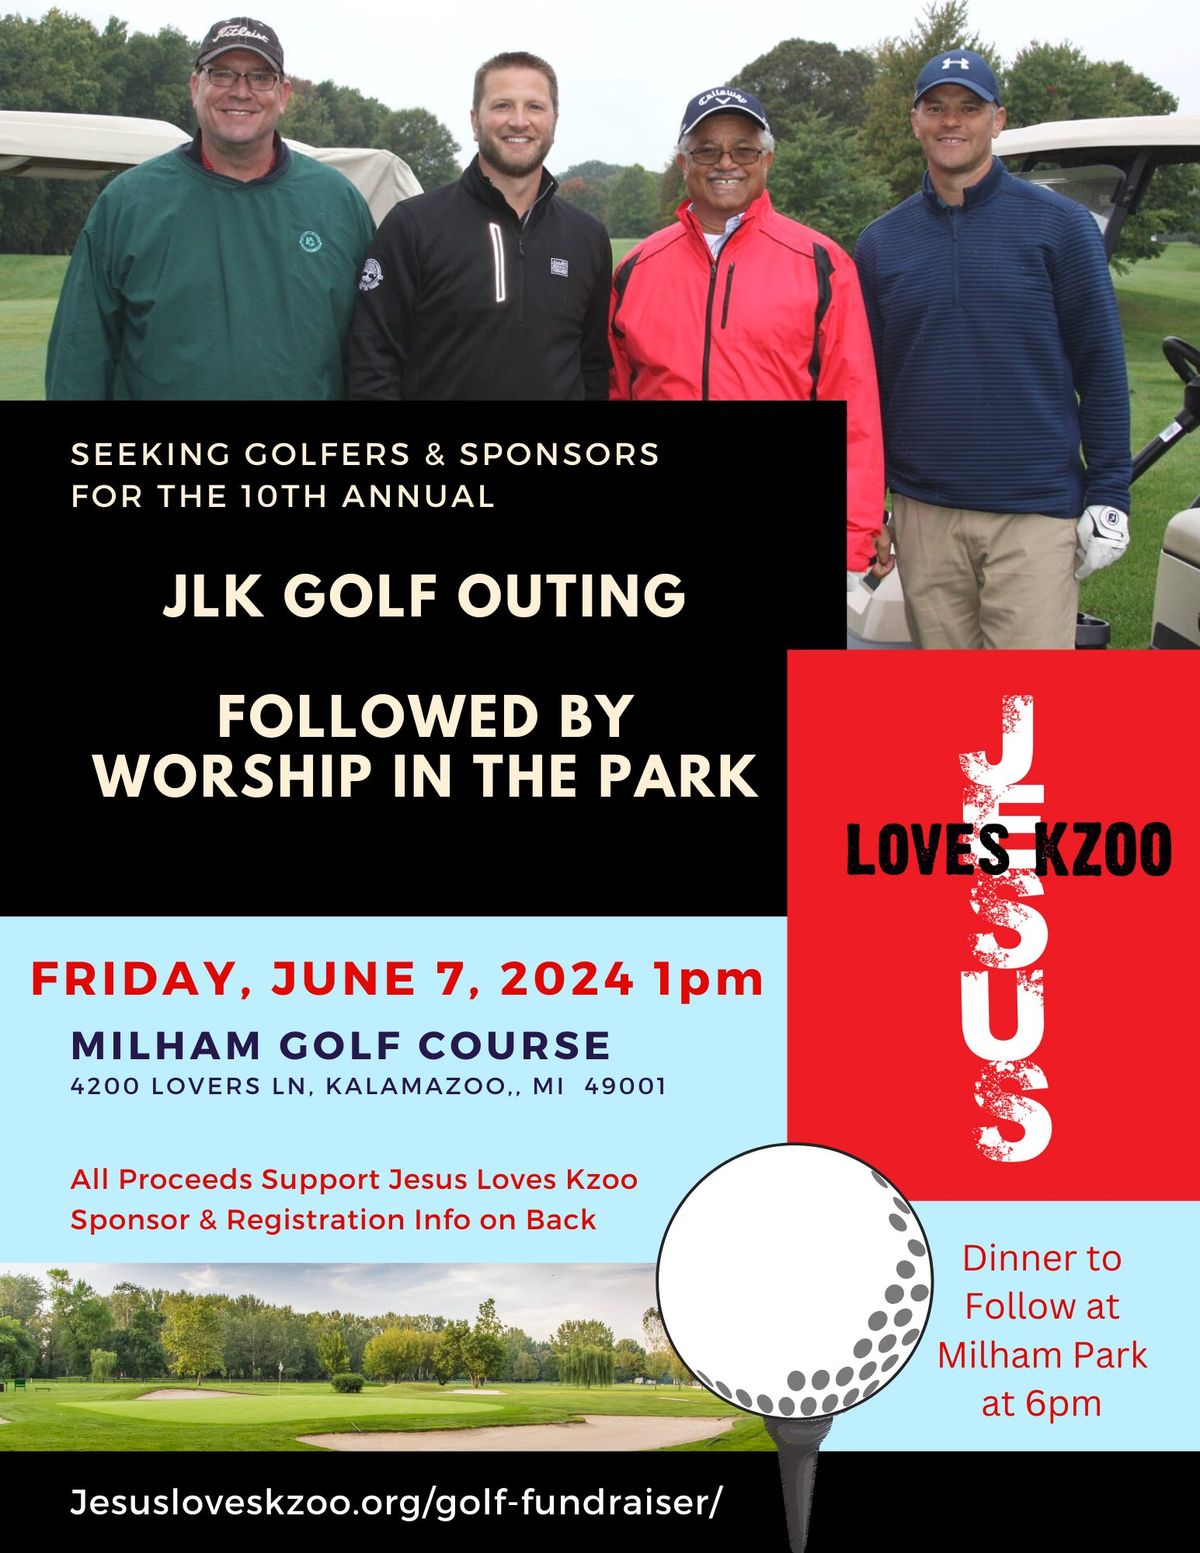 10th Annual JLK GOLF OUTING